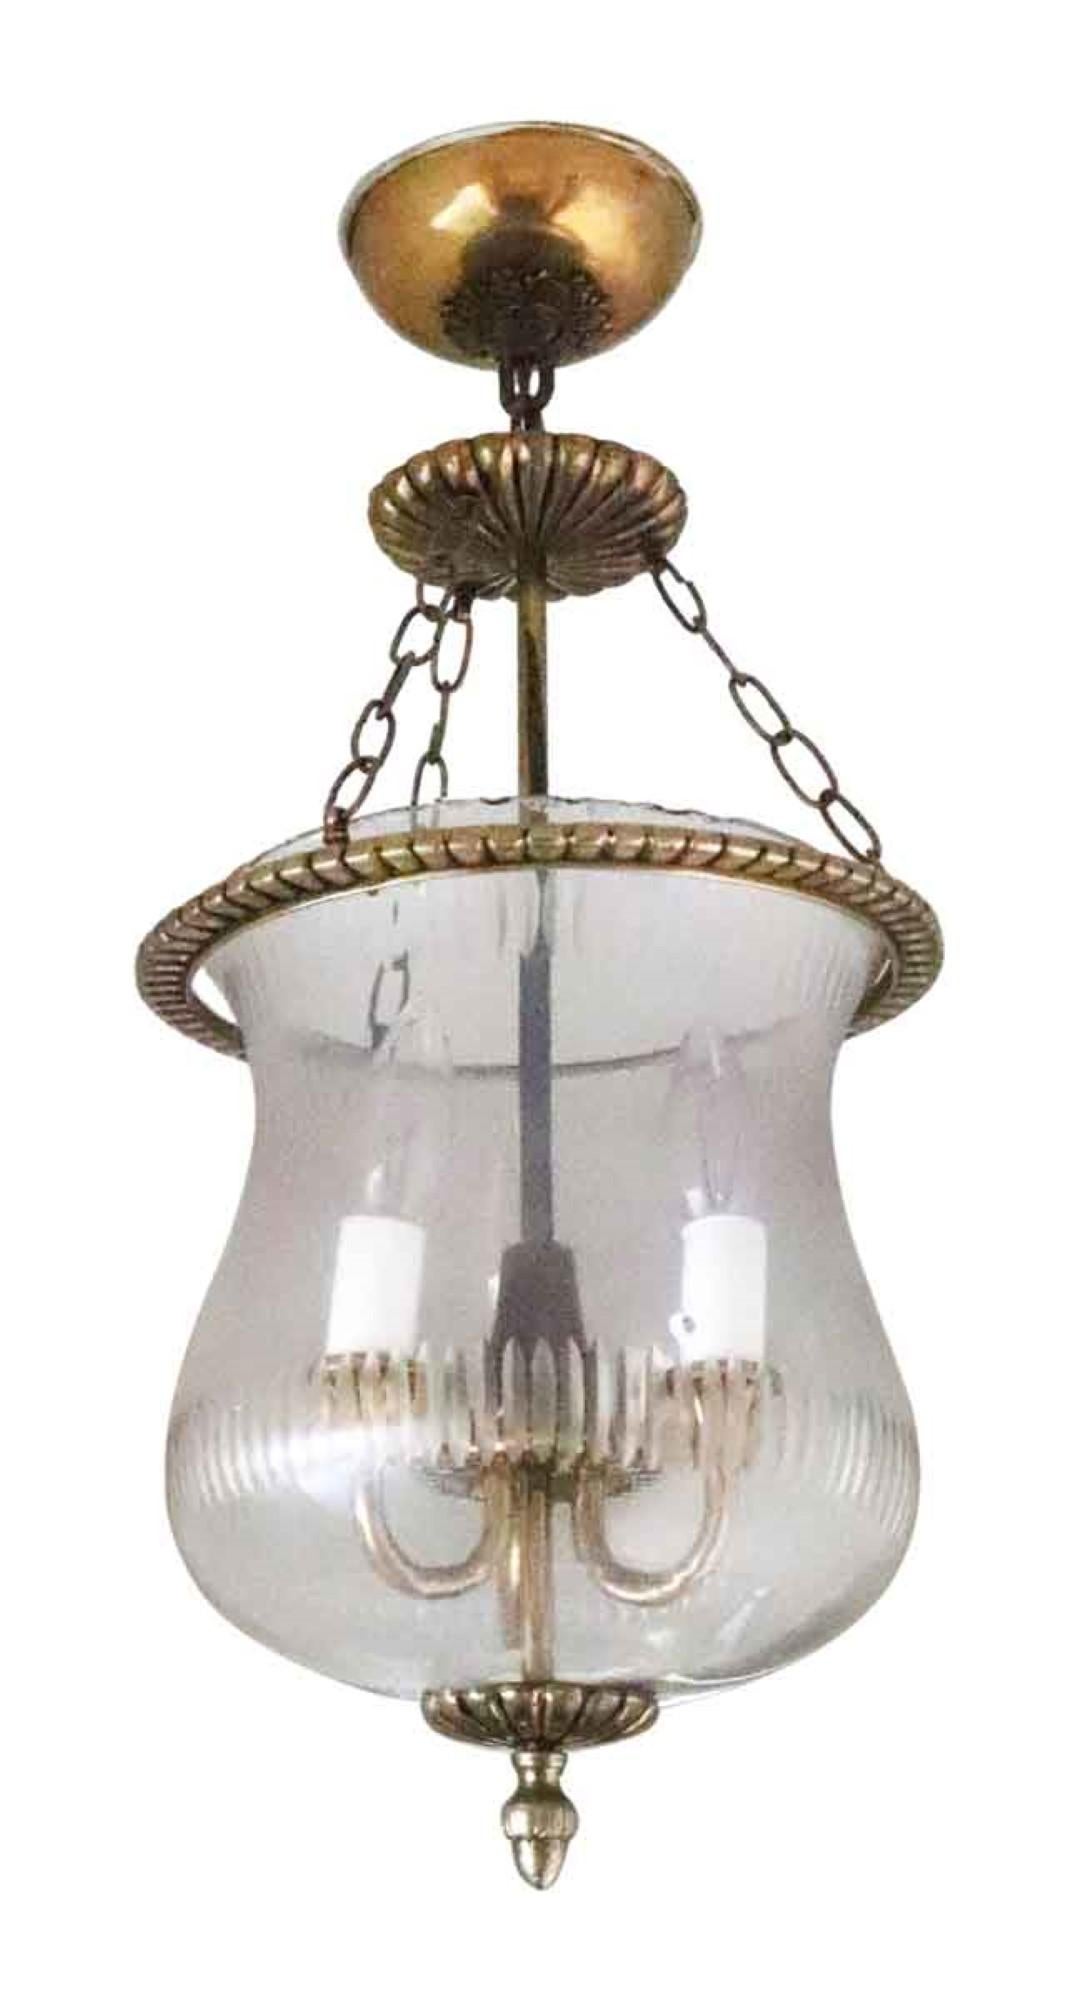 1931 three light cast brass bell jar fixture with etched glass and a fluted frame and finial. From the 1931 NYC Waldorf Astoria Towers 35th floor. Waldorf Astoria authenticity card included with your purchase. This can be seen at our 333 West 52nd